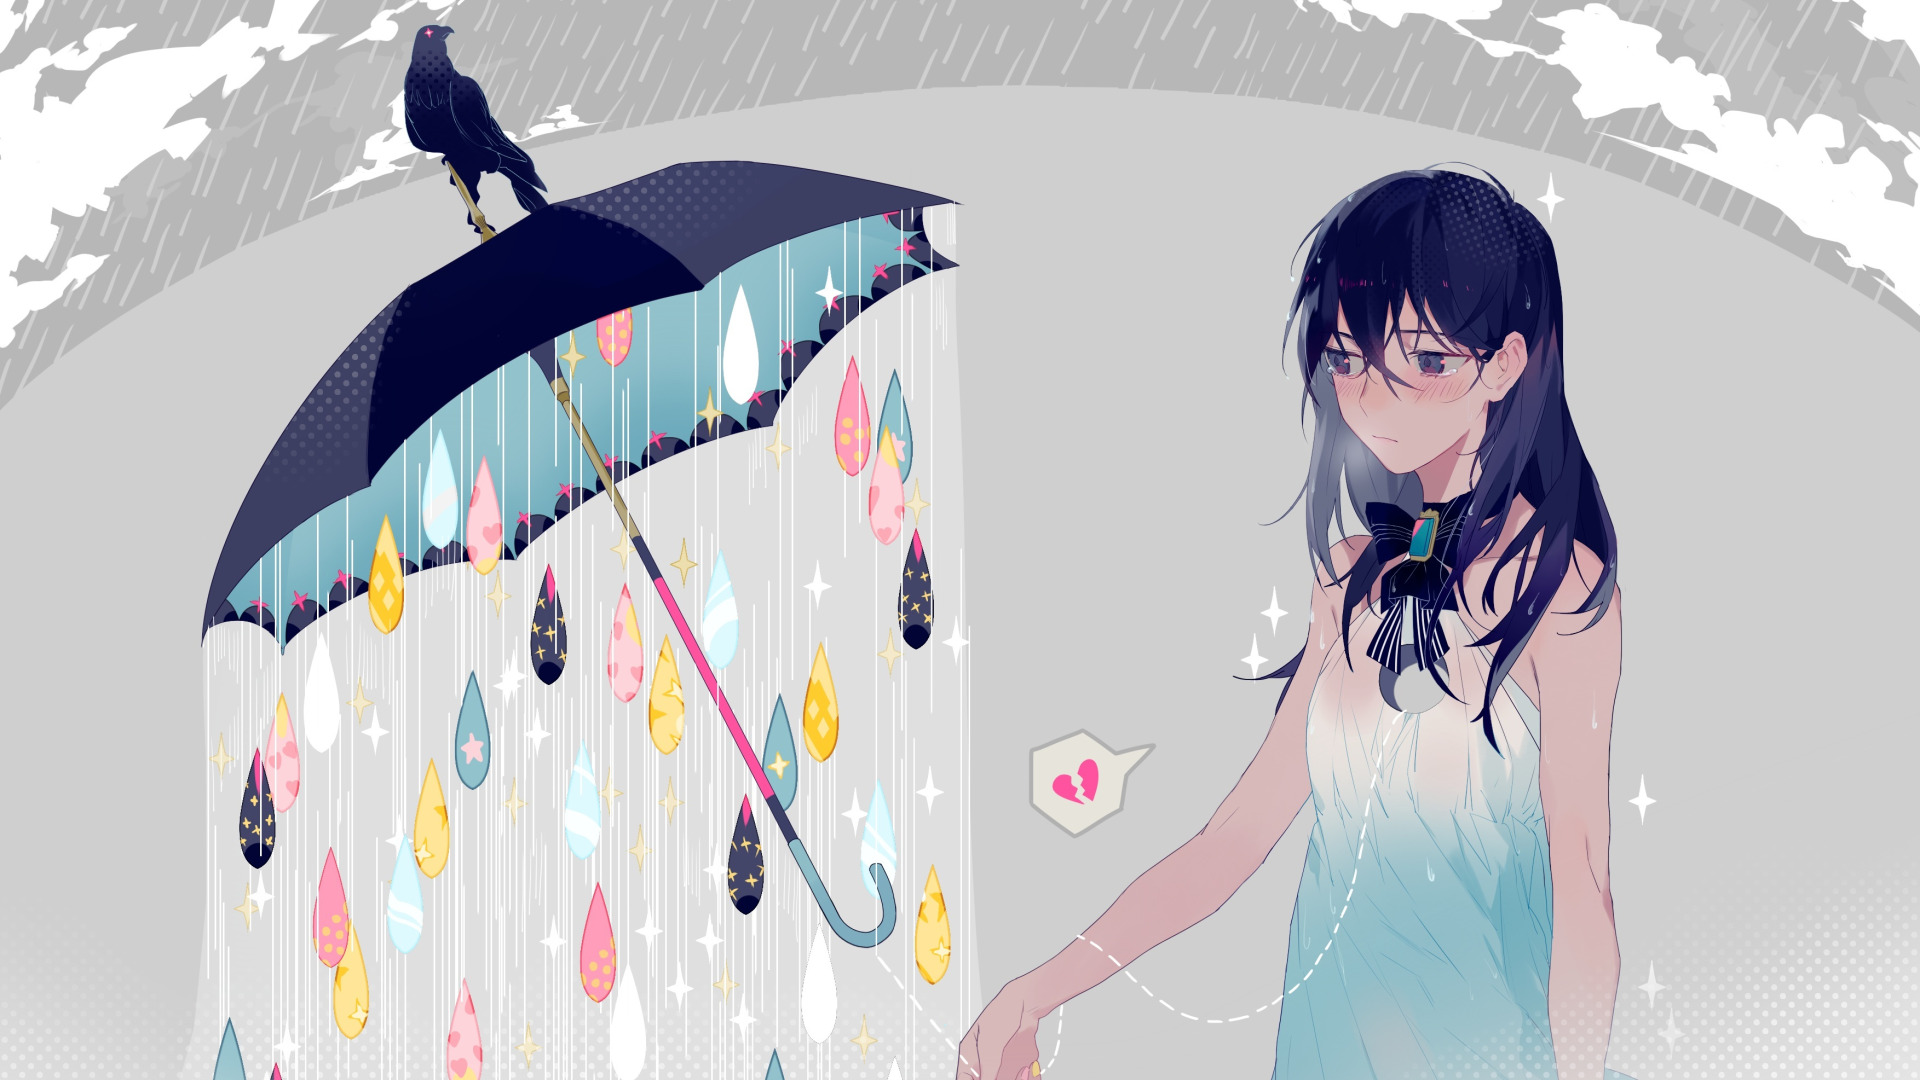 Download wallpaper anime, full HD, wallpaper 1920x1080, section art in  resolution 480x272